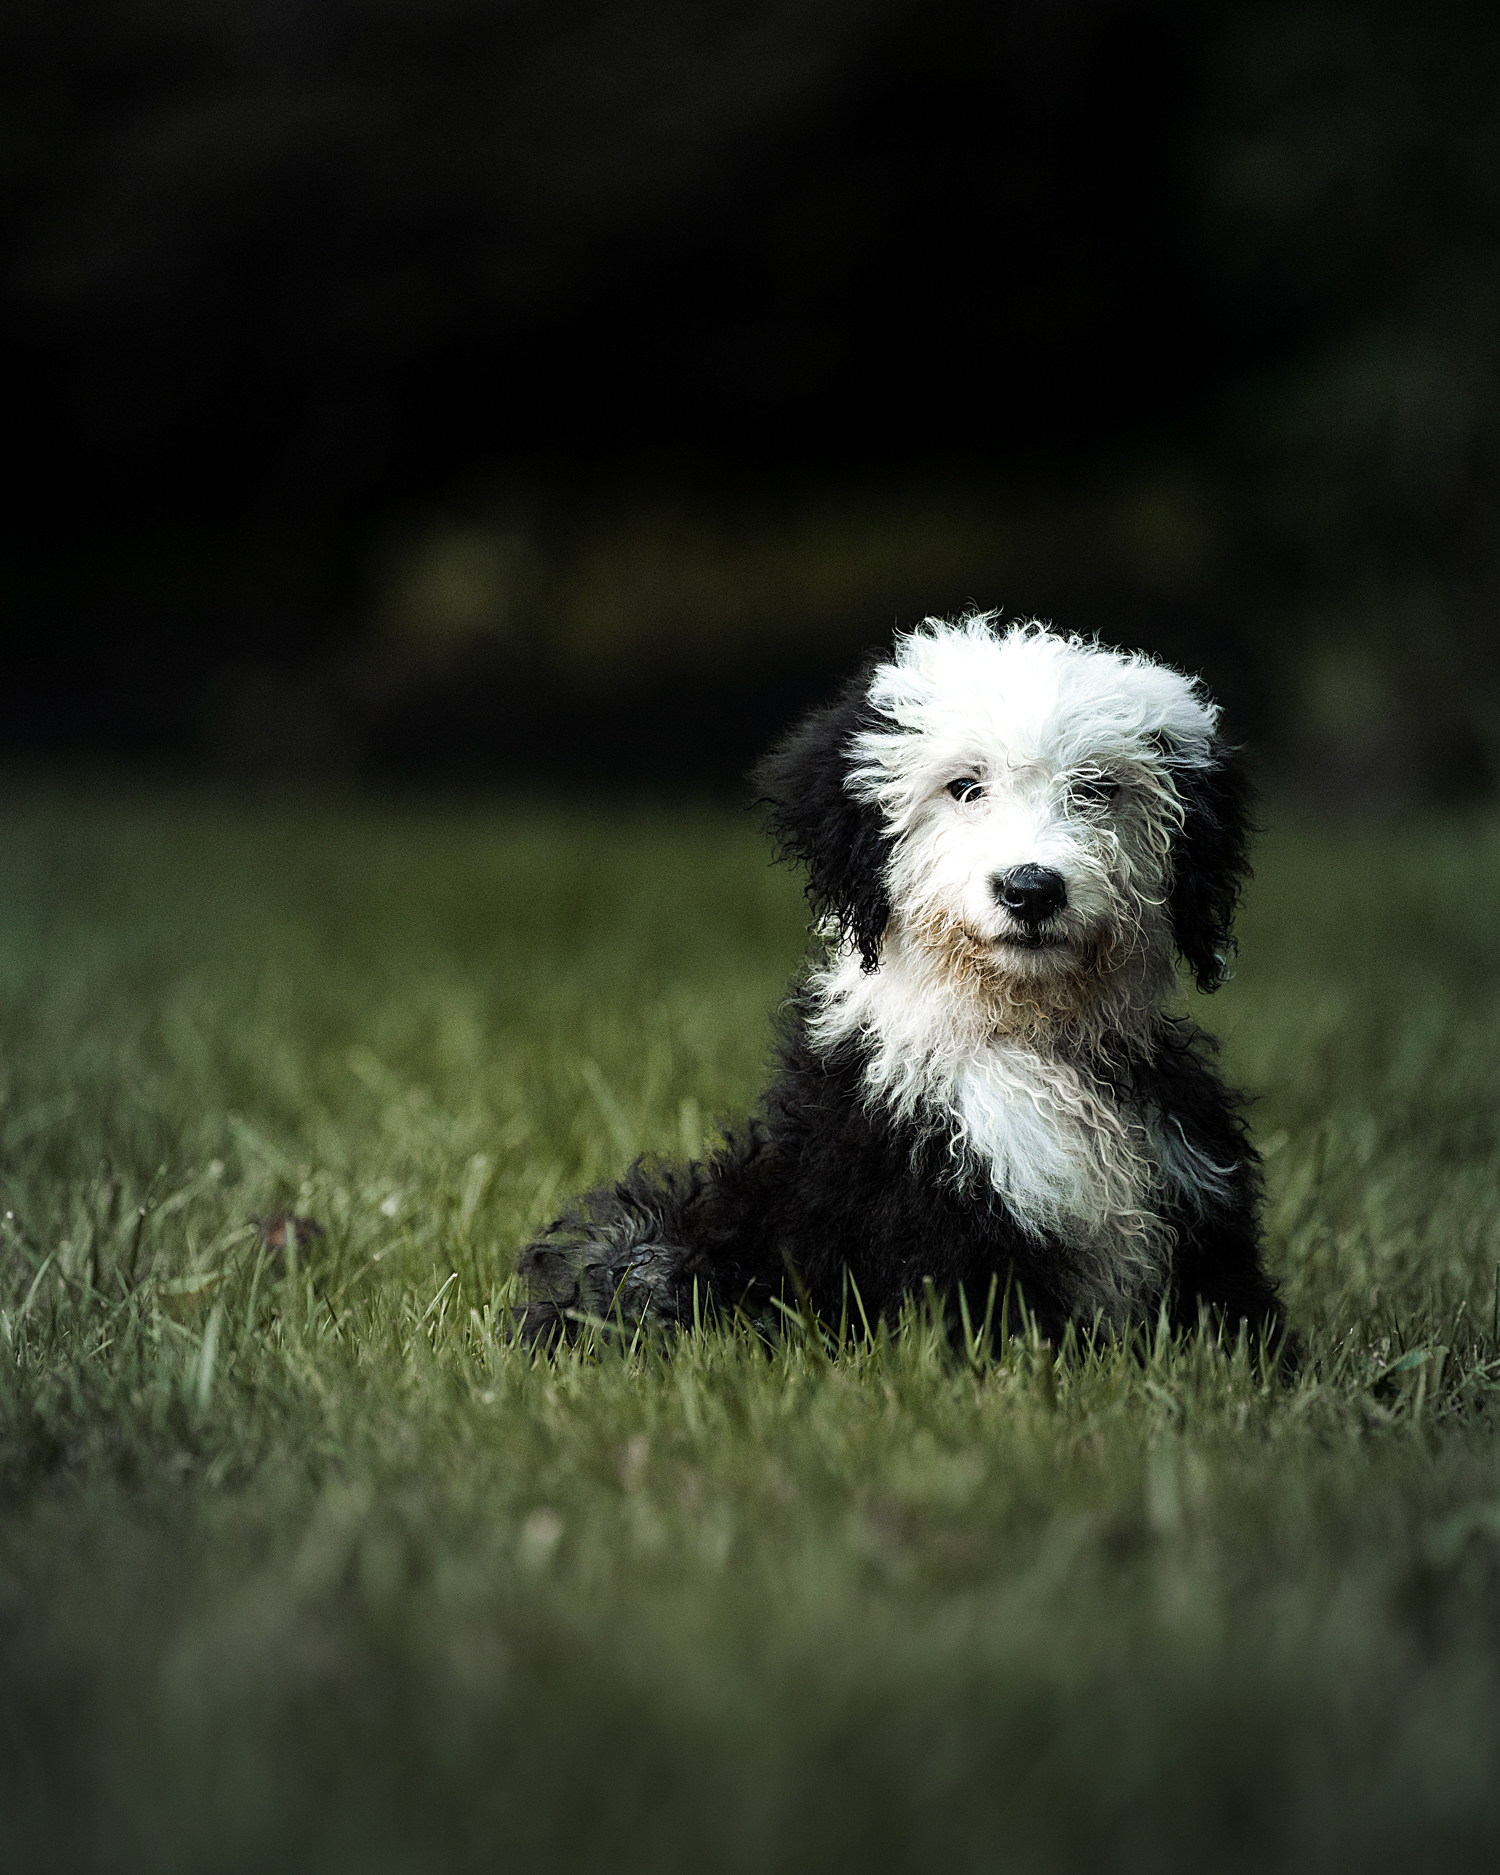 Tilly, our sheepadoodle